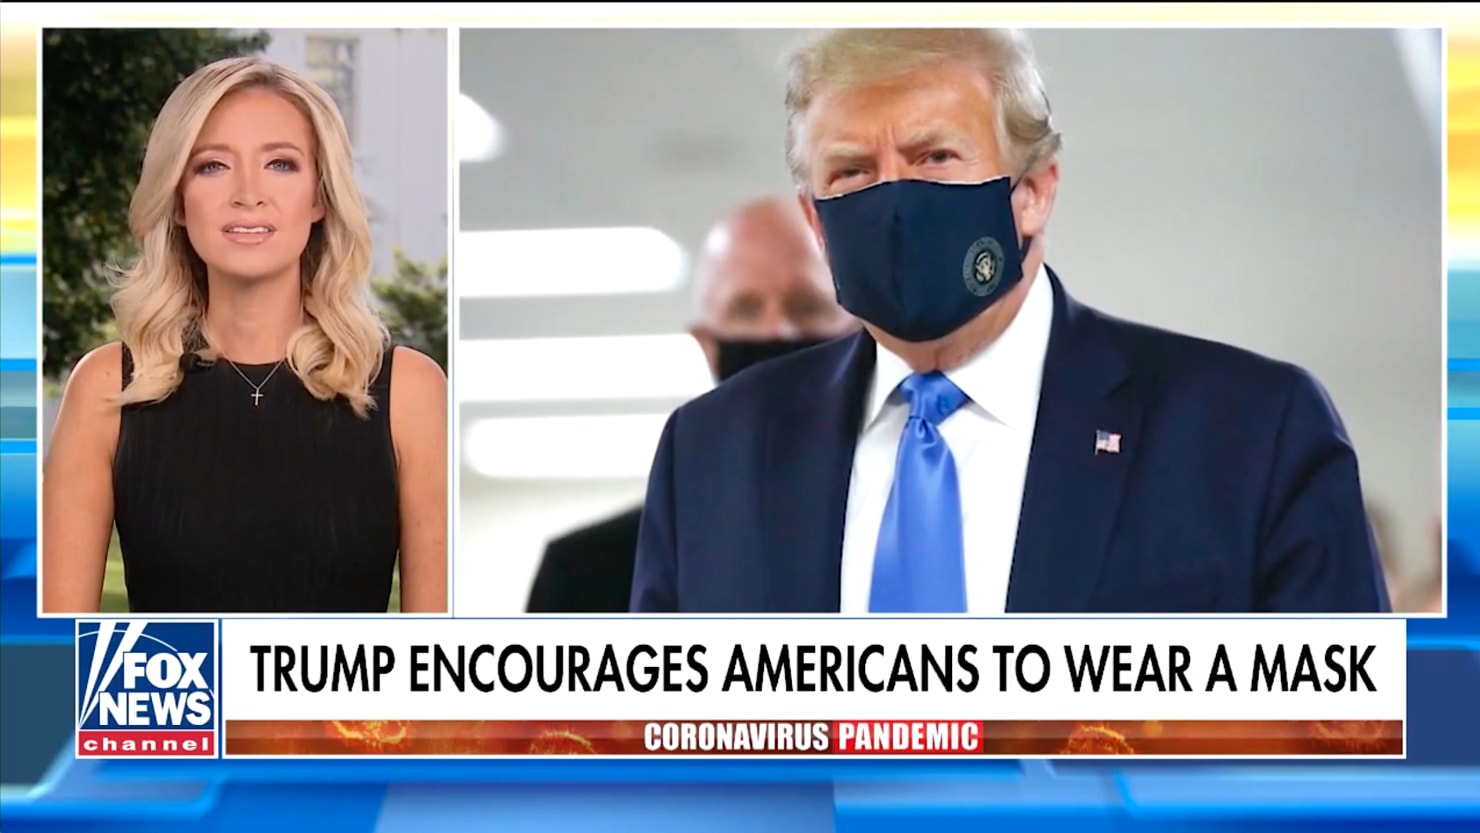 Kayleigh Urges Fox Viewers to 'Follow Trump's Lead' on Masks - The Daily Beast